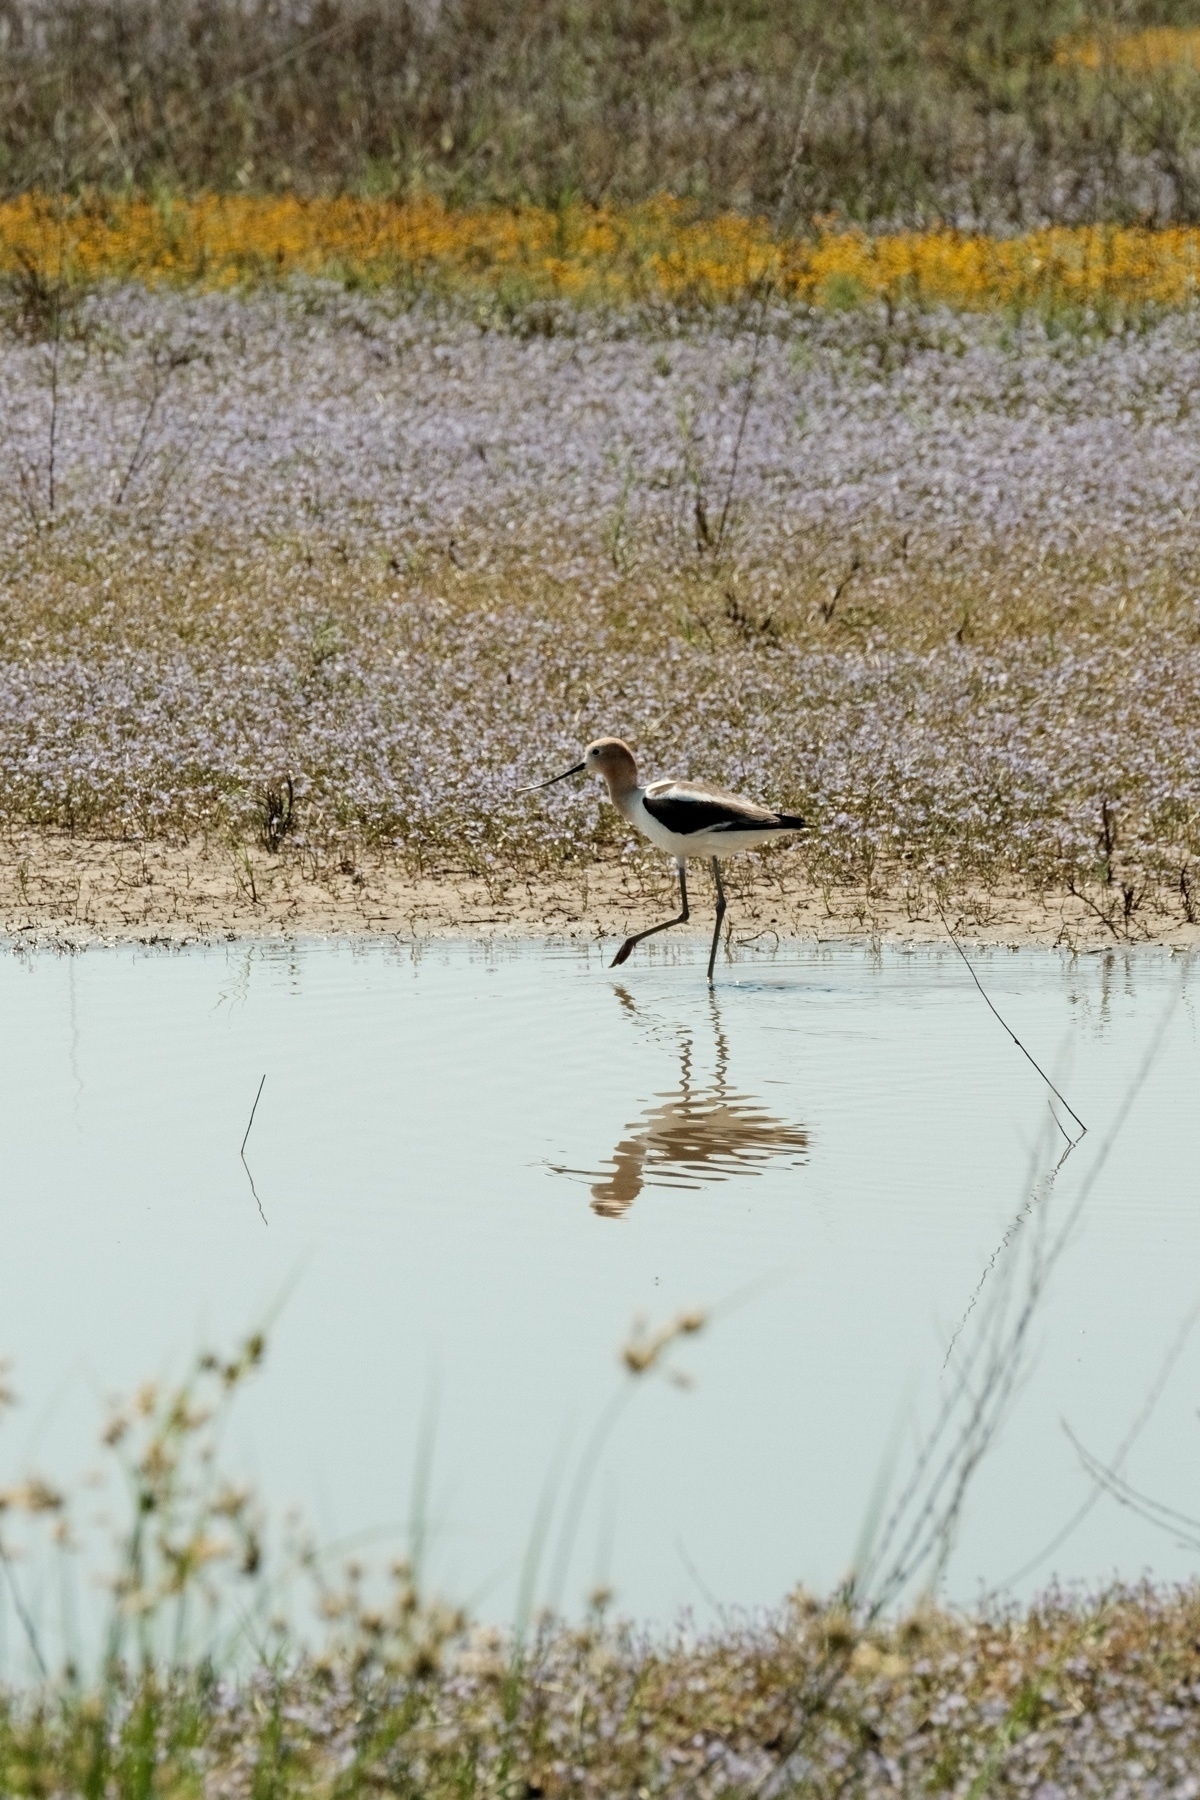 An American Avocet has a brown head and neck with black wings and a white underside. It’s stepping through a pond and beyond it is a floor of purple and then yellow flowers.